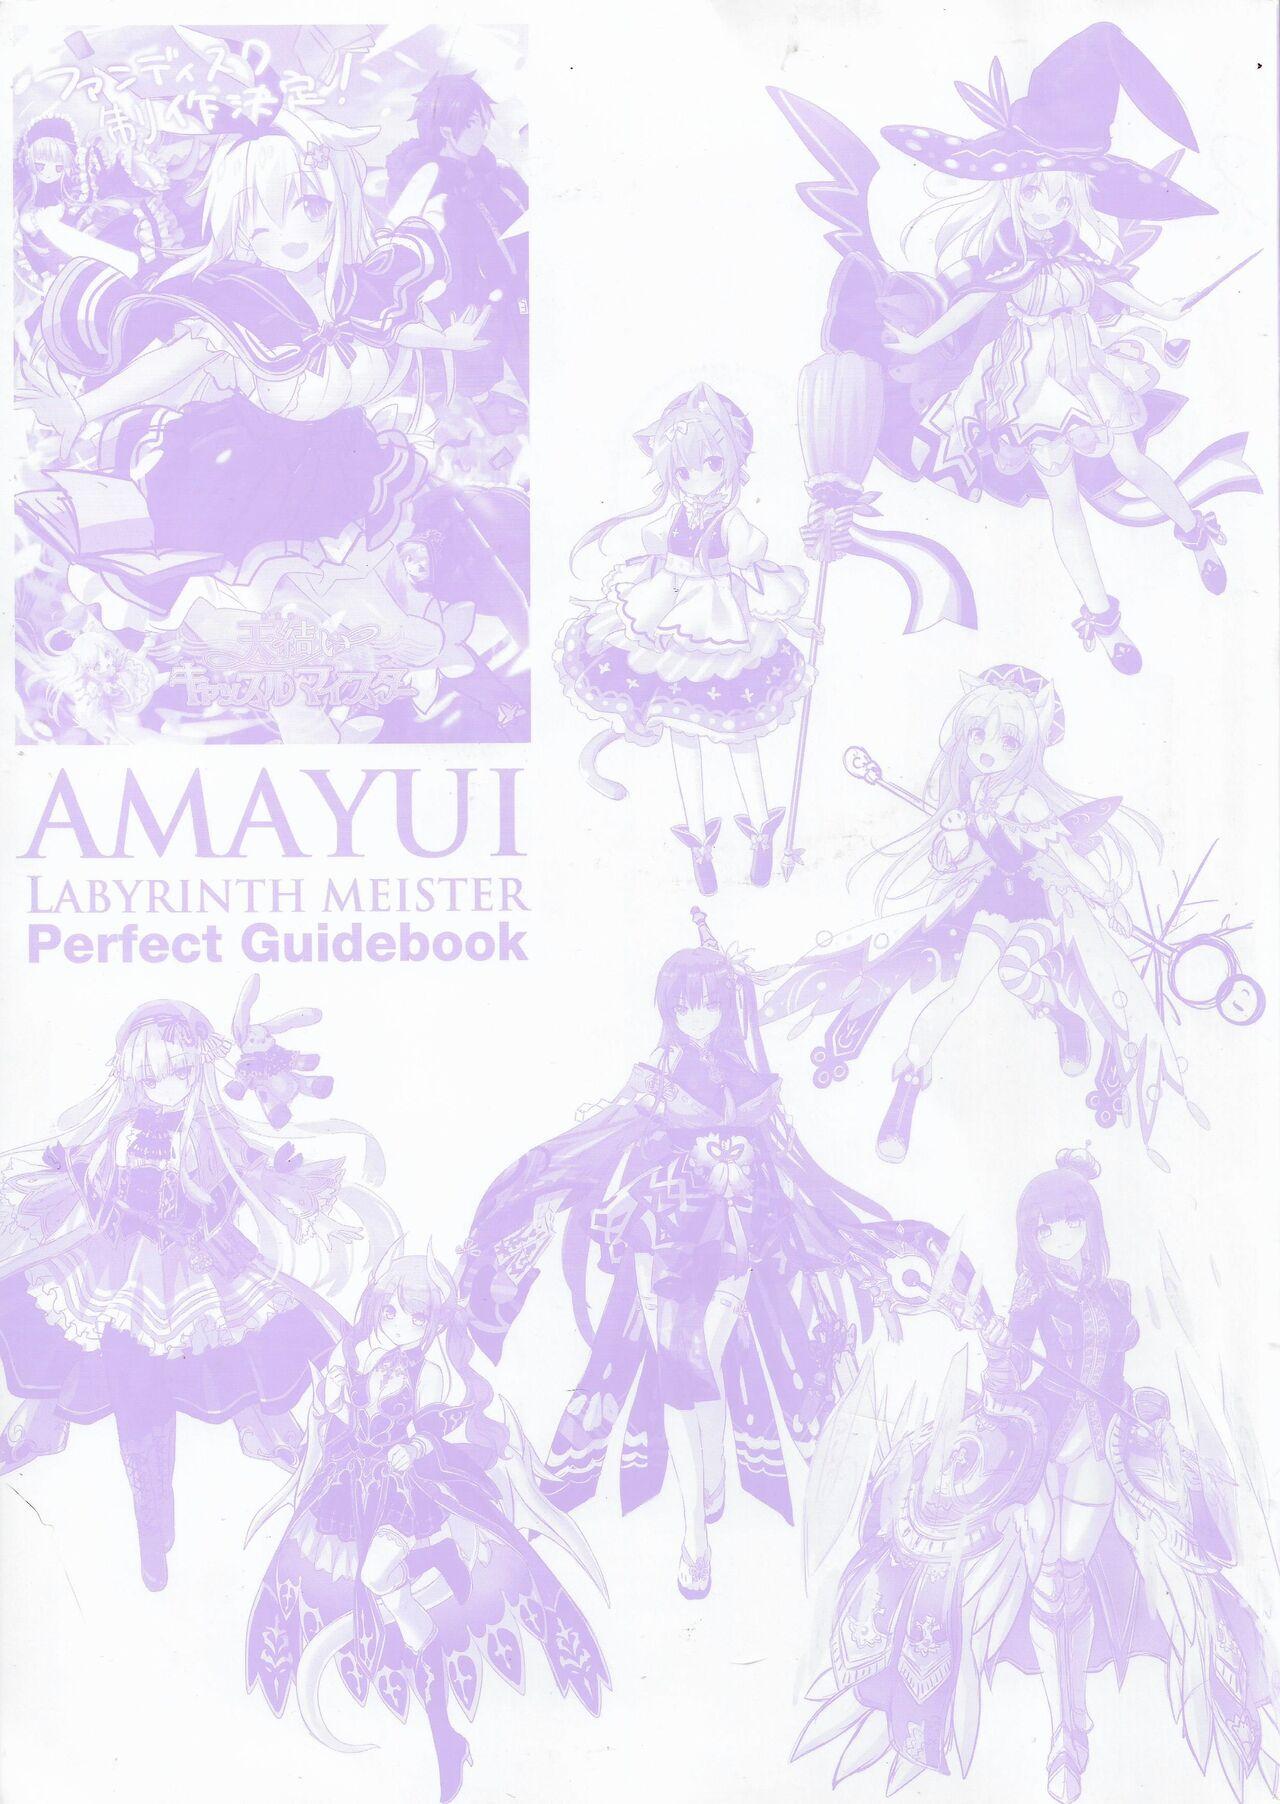 Amayui Labyrinth Meister Perfect Guidebook 259